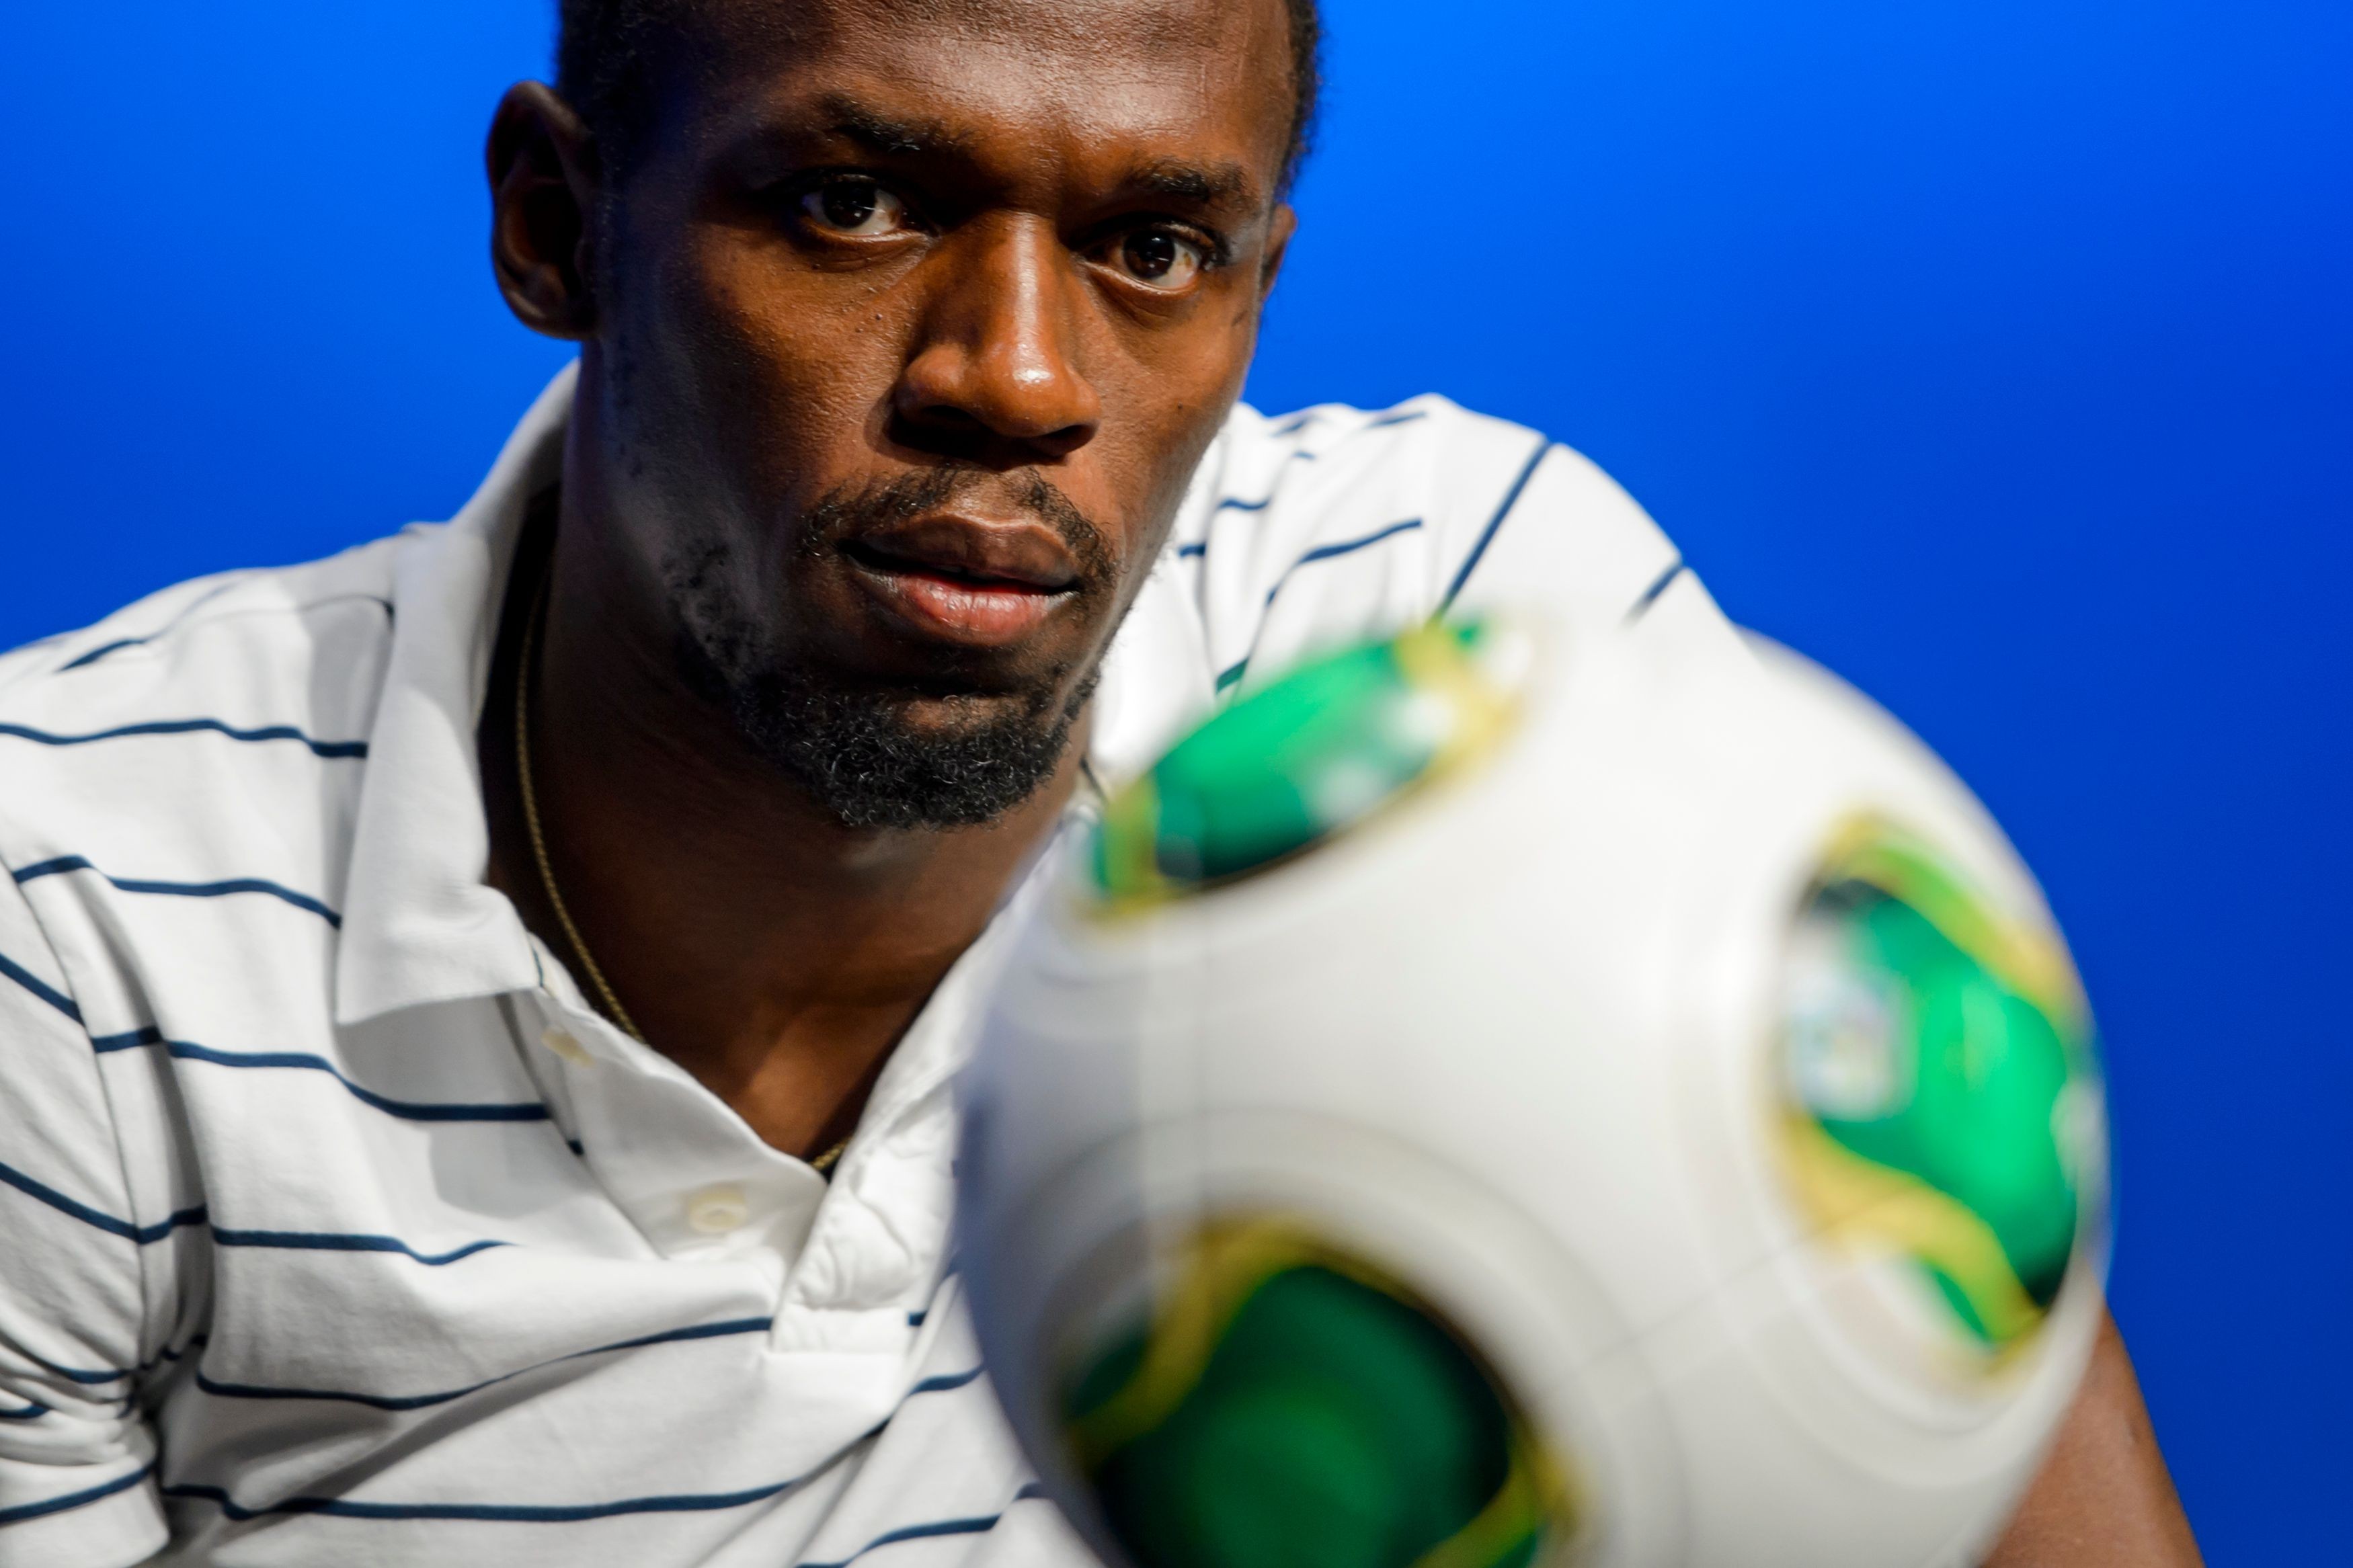 Jamaica's Usain Bolt looks at a ball during a visit to Fifa headquarters in 2013. Photo: AFP